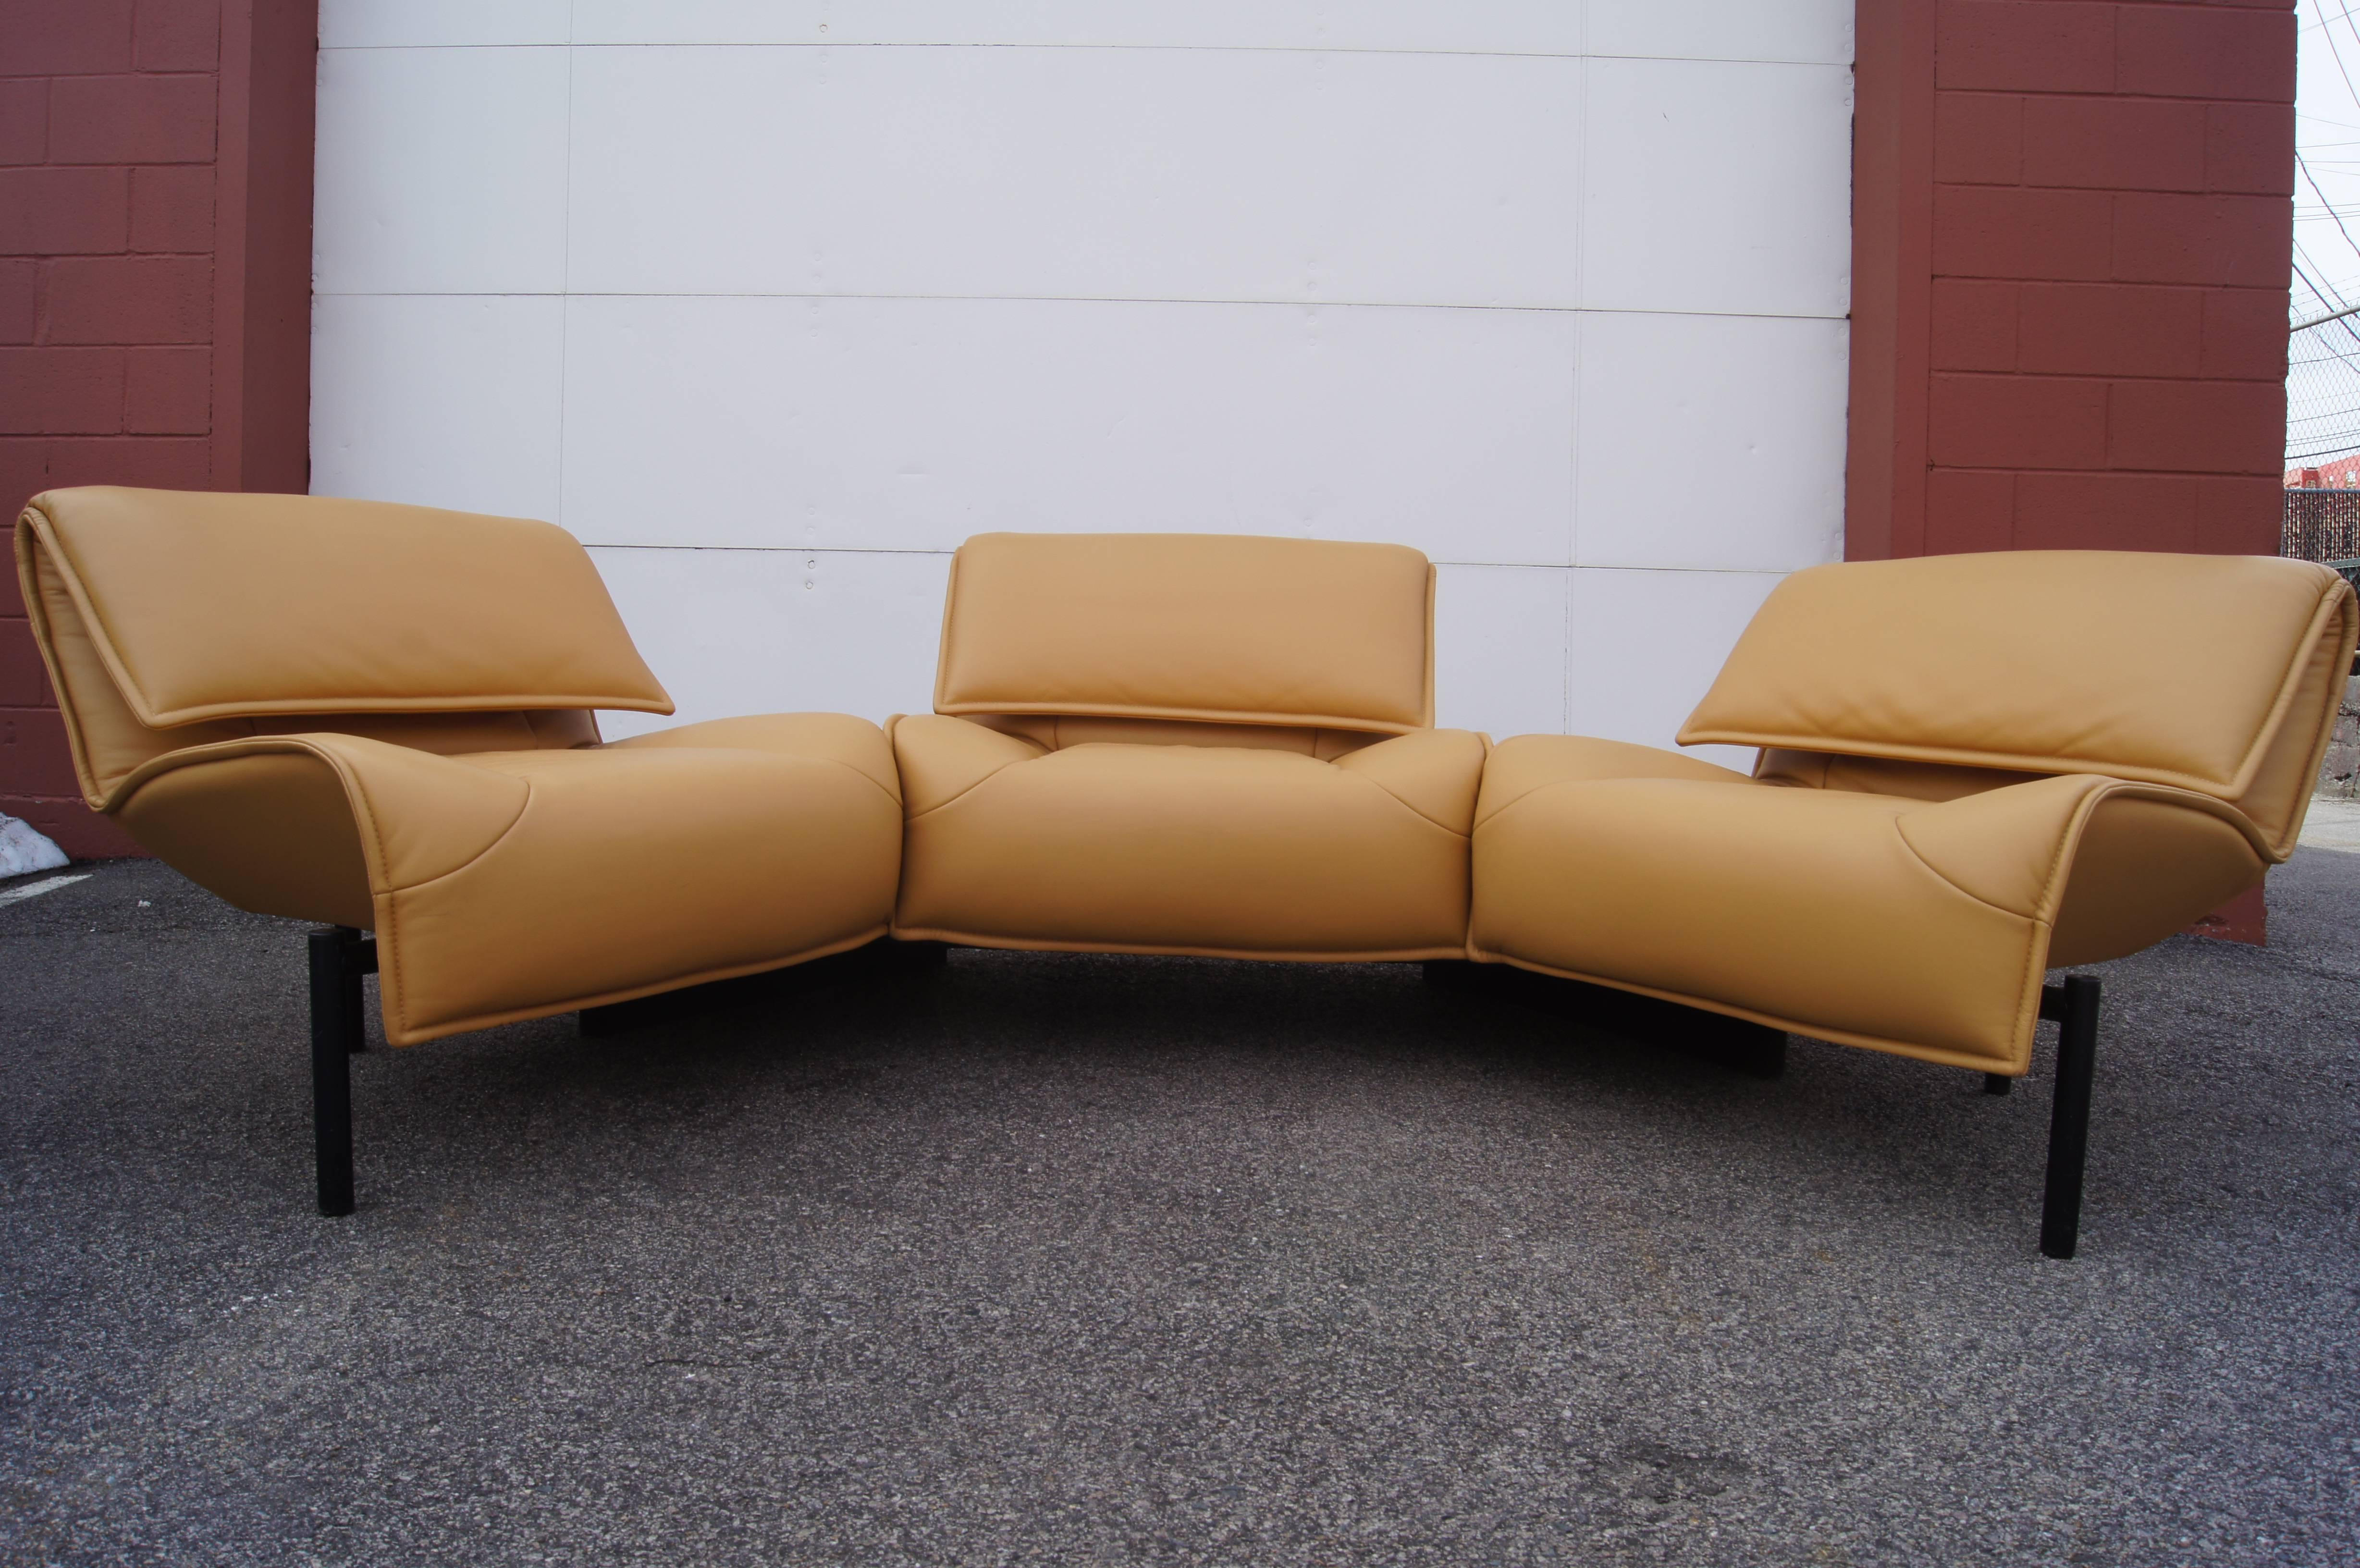 Designed by Vico Magistretti and produced by Cassina in 1984, the Veranda 3 sofa comprises three connected lounge chairs. The two at the end swivel on their fixed base to form a more intimate configuration. Each supple beige-colored leather seat has